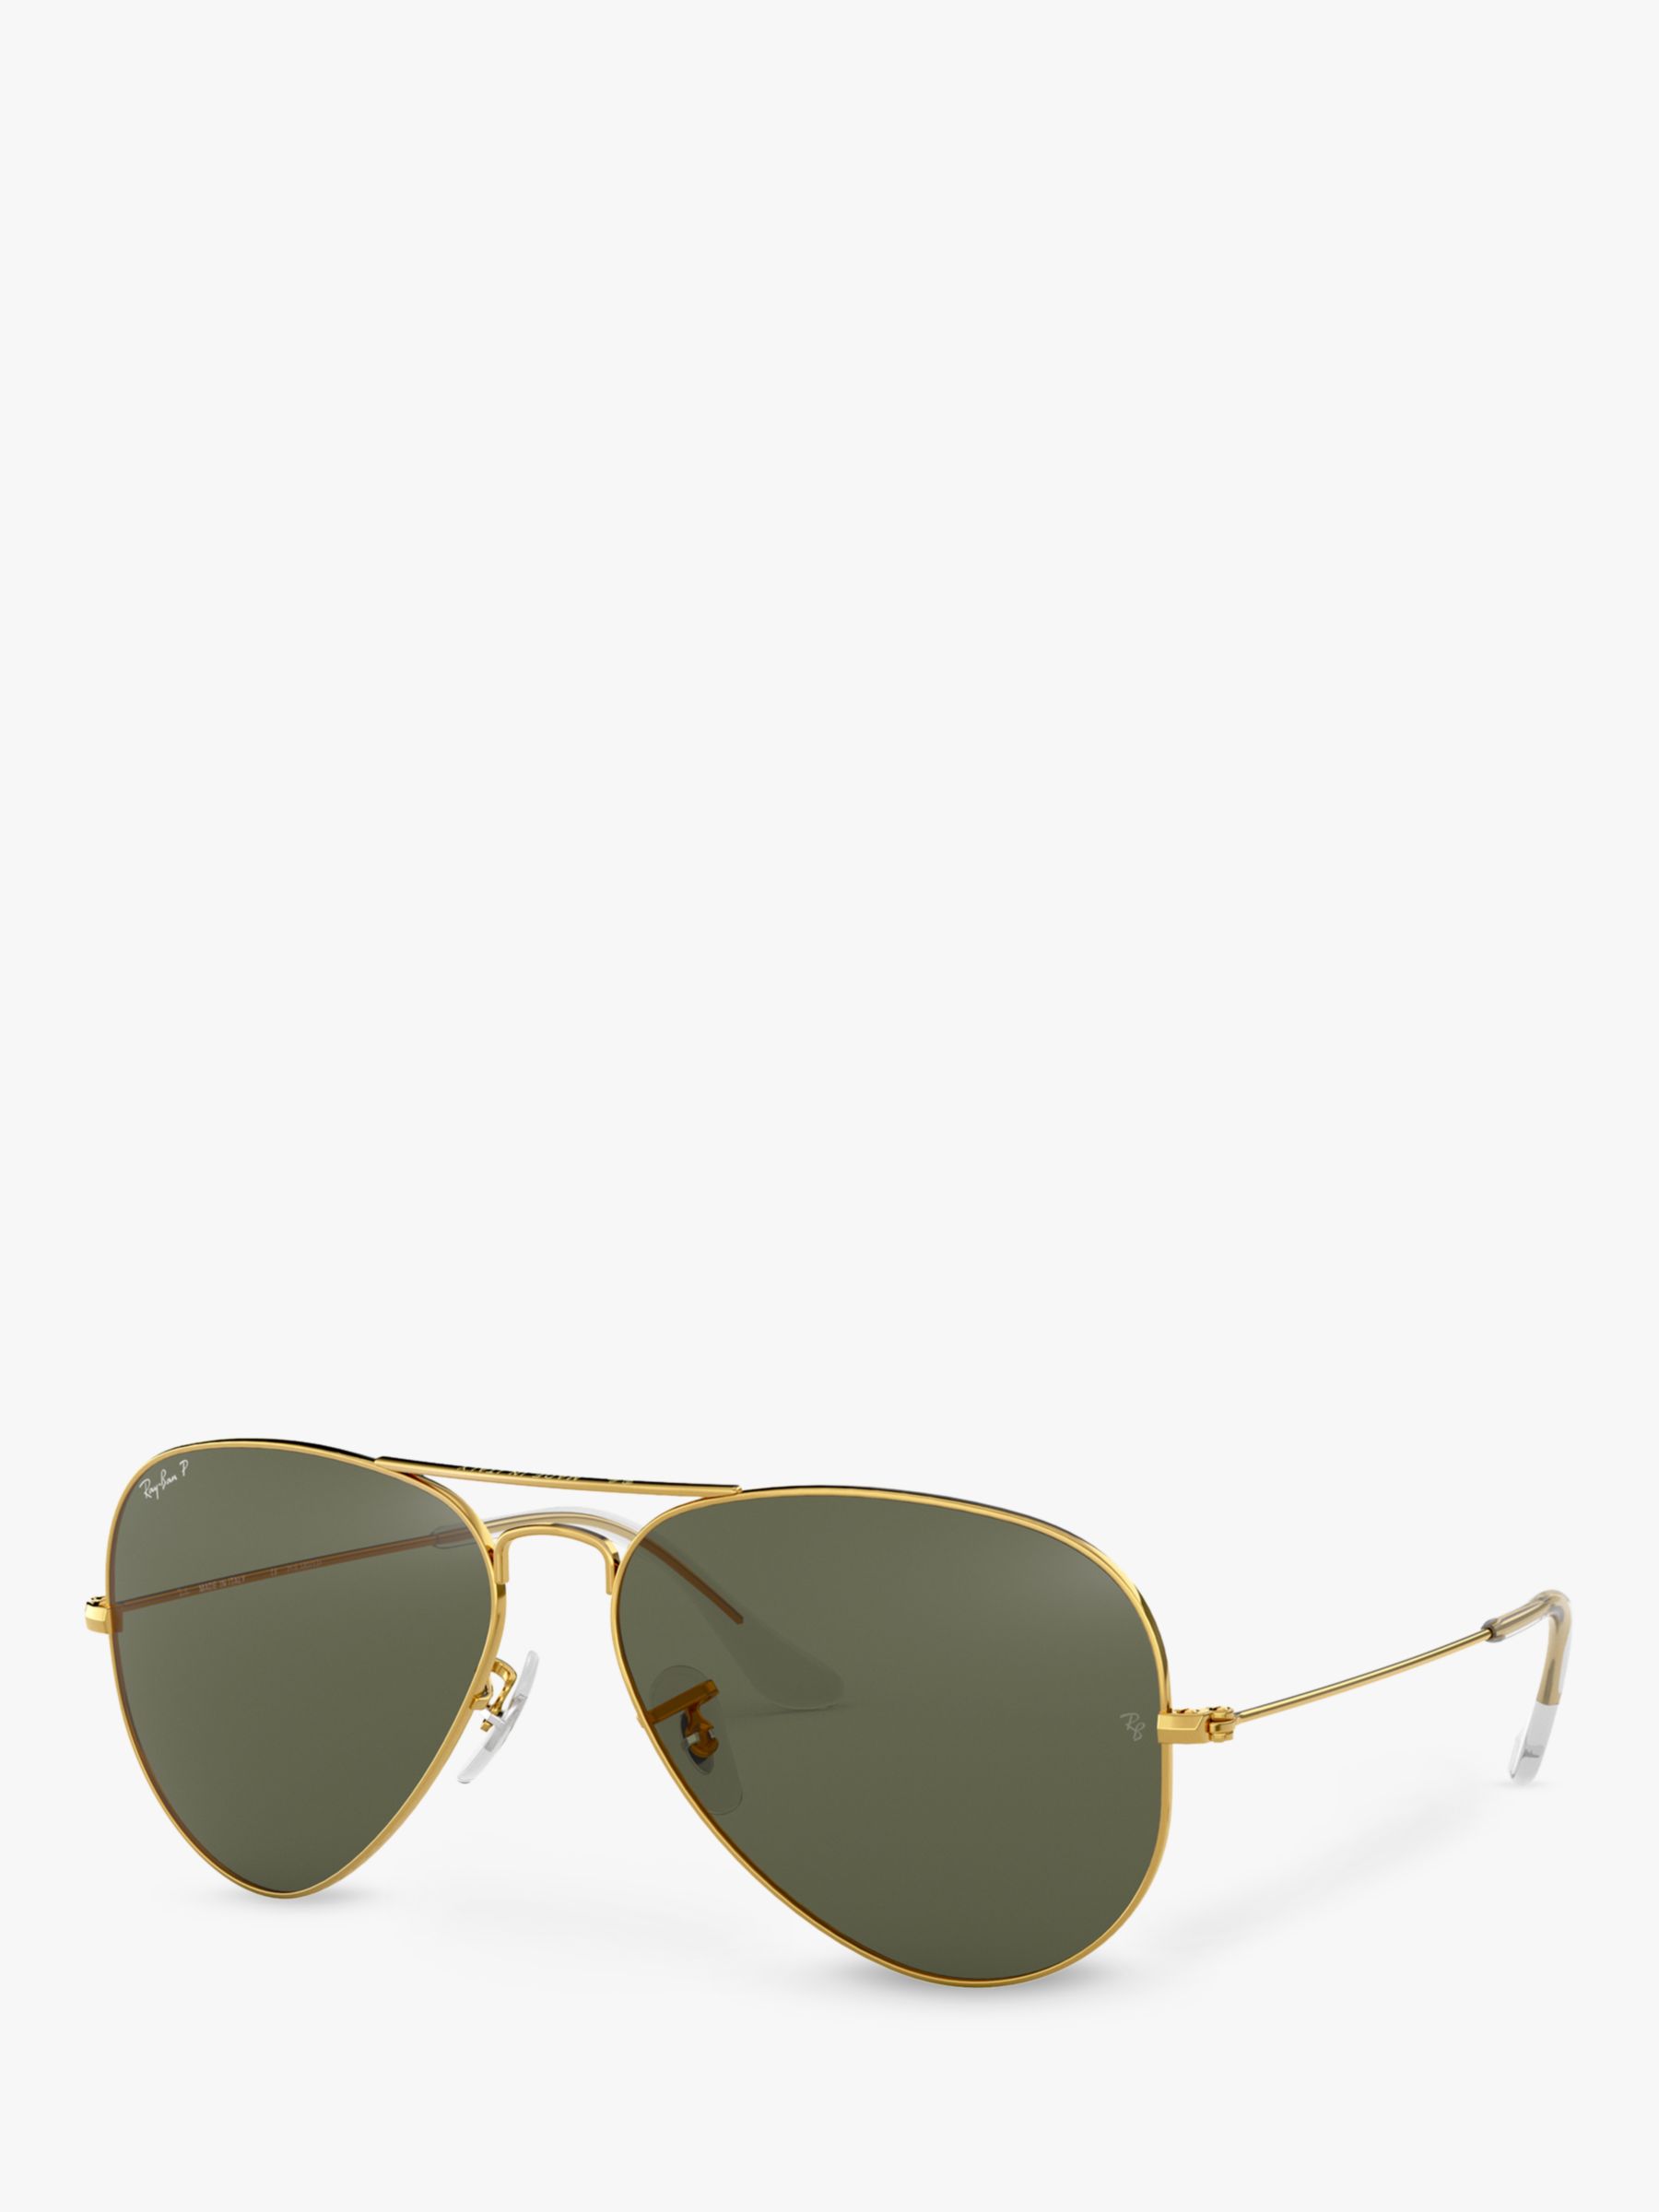 Ray-Ban RB3025 Iconic Aviator Sunglasses, Gold at John Lewis & Partners